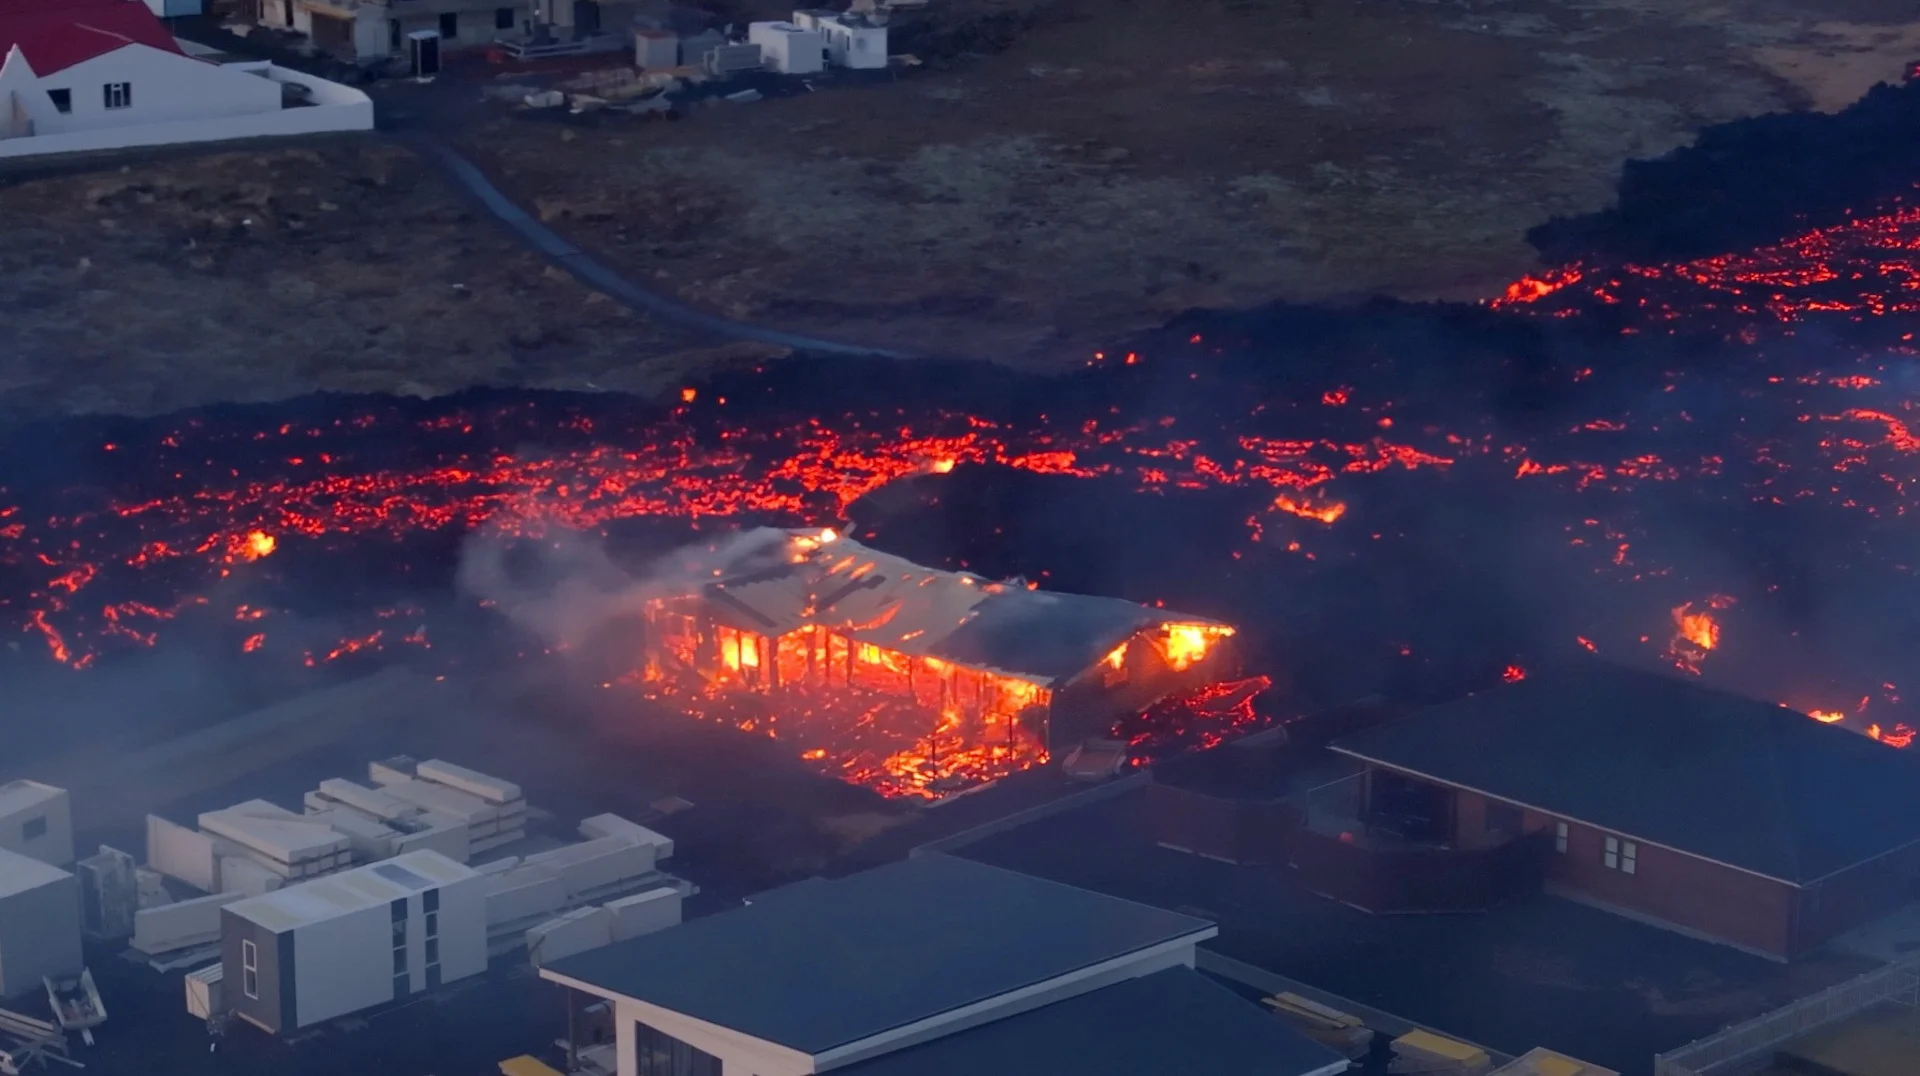 Iceland volcano recedes after 'black day' of town fires